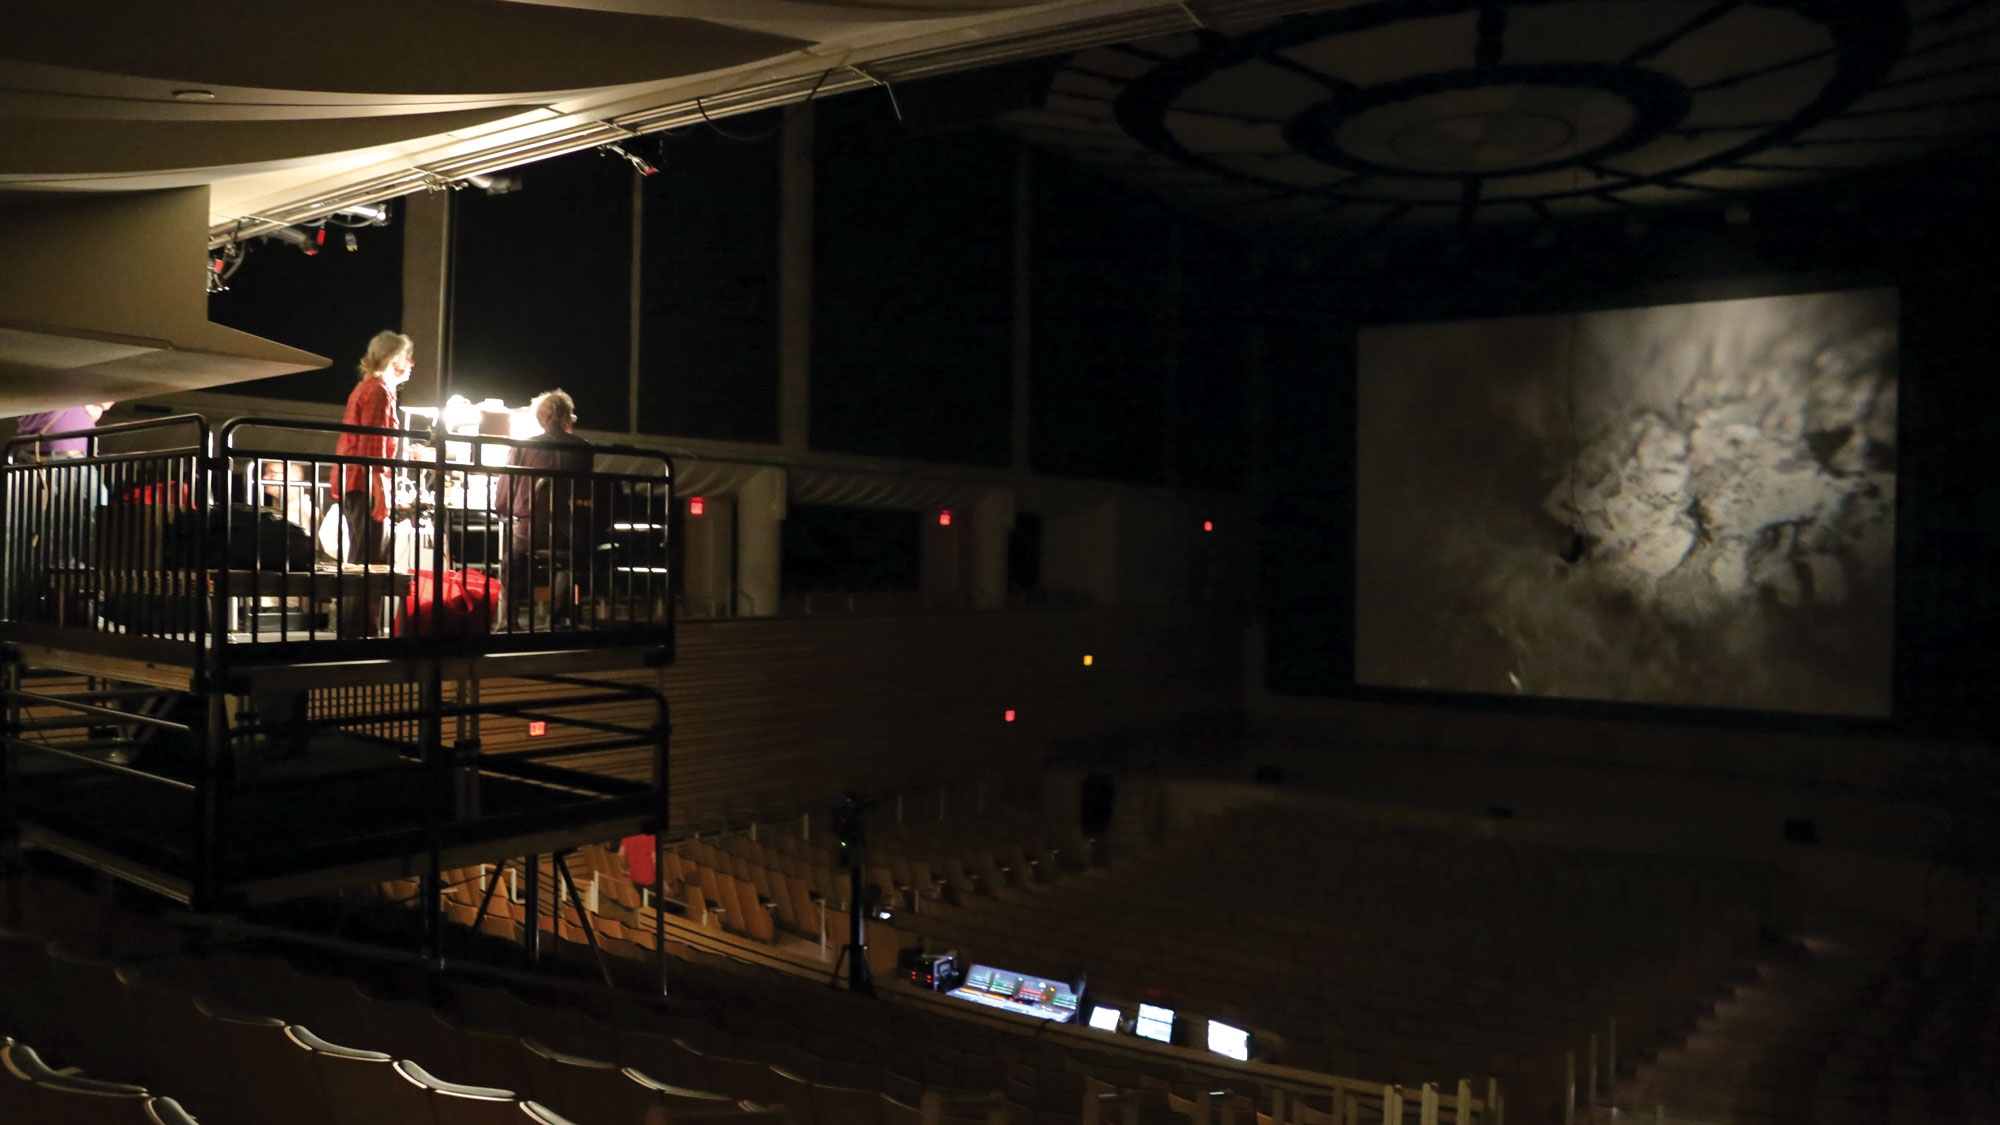 Two people on scaffolding projecting an image of a gray ink blob onto a large screen on the concert hall stage.  